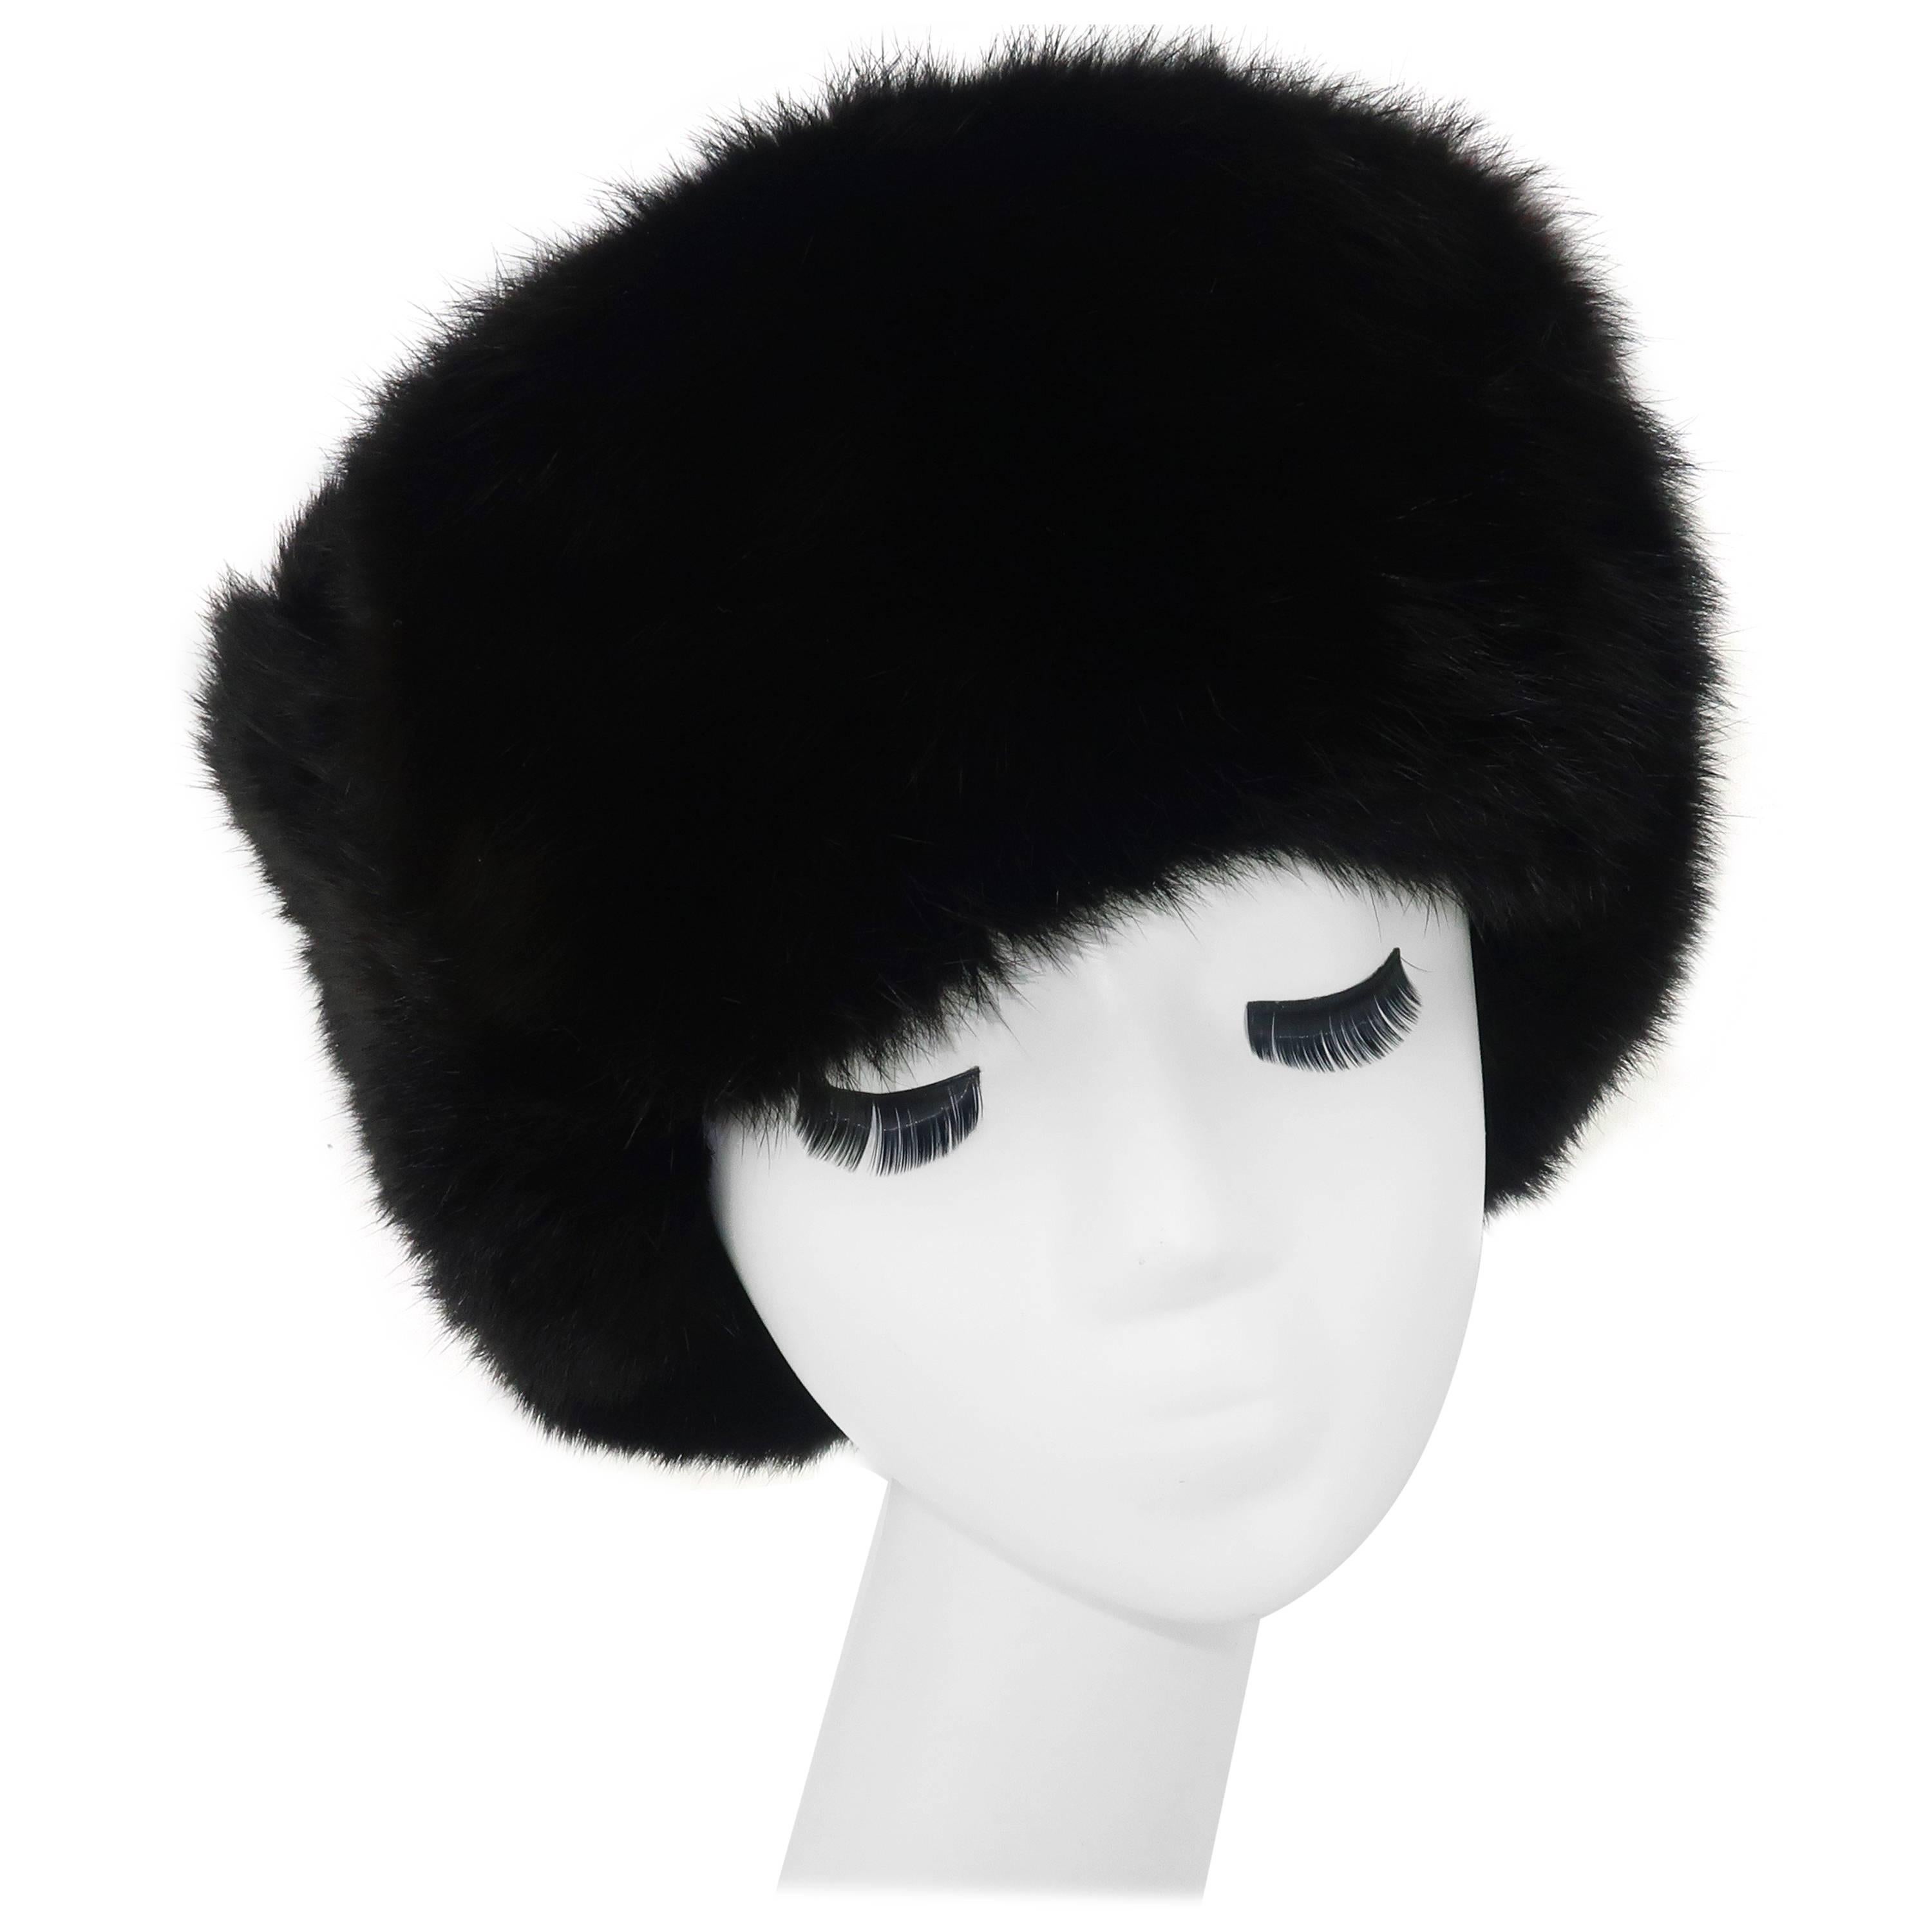 Vintage Russian Sable Fur Hat With Ear Flaps